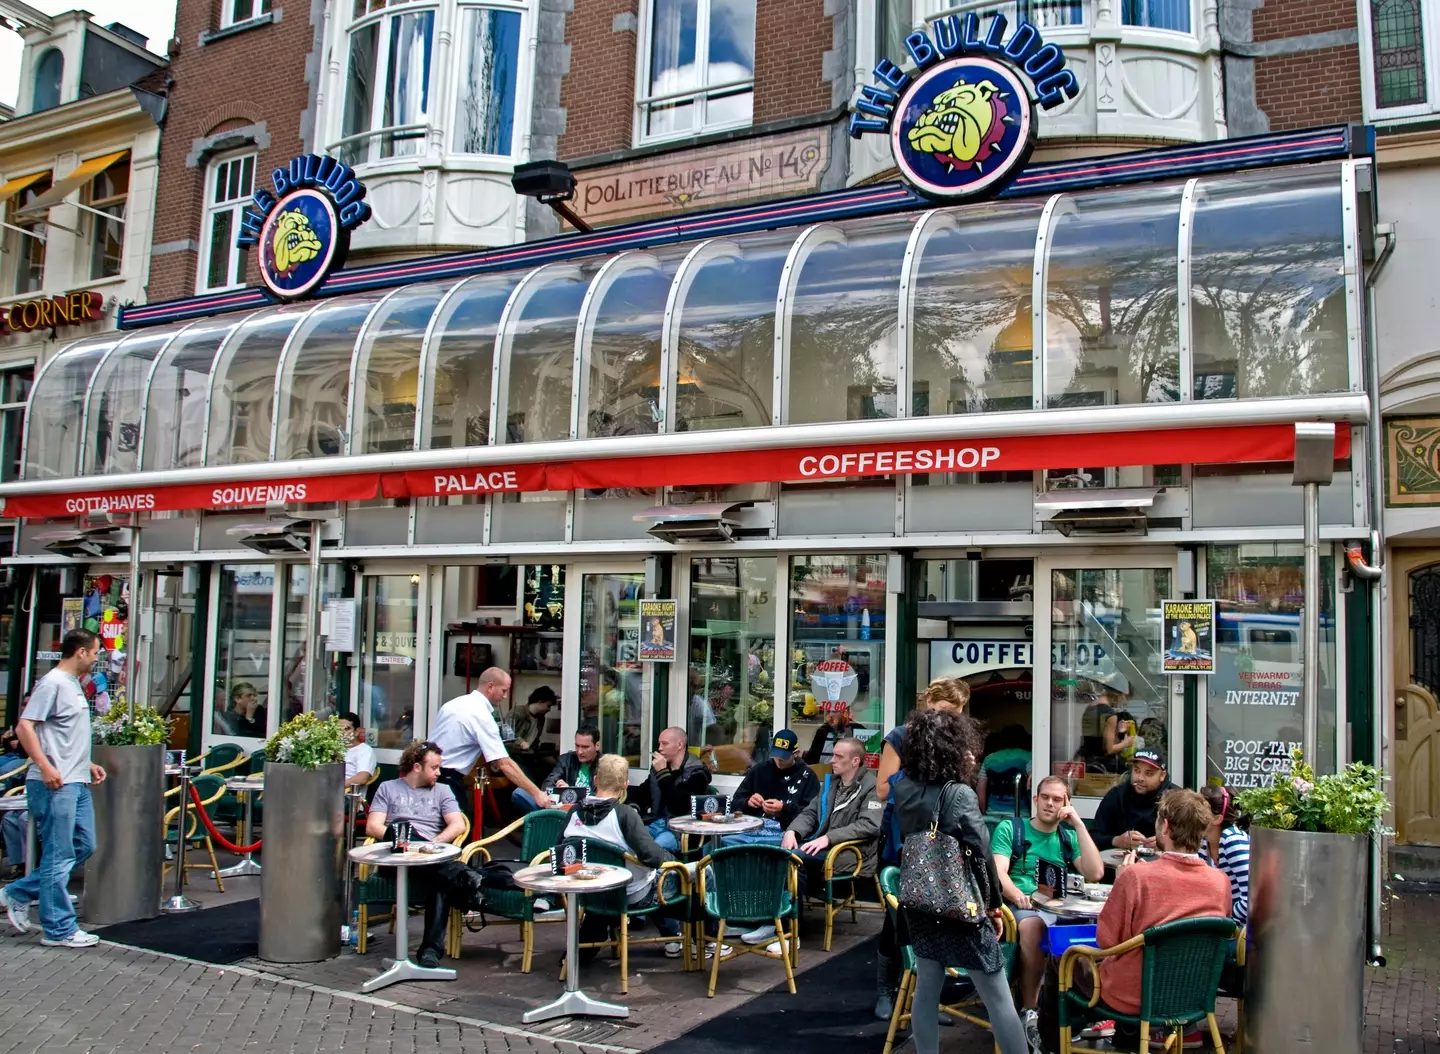 Amsterdam is also famous for cannabis coffee shops.